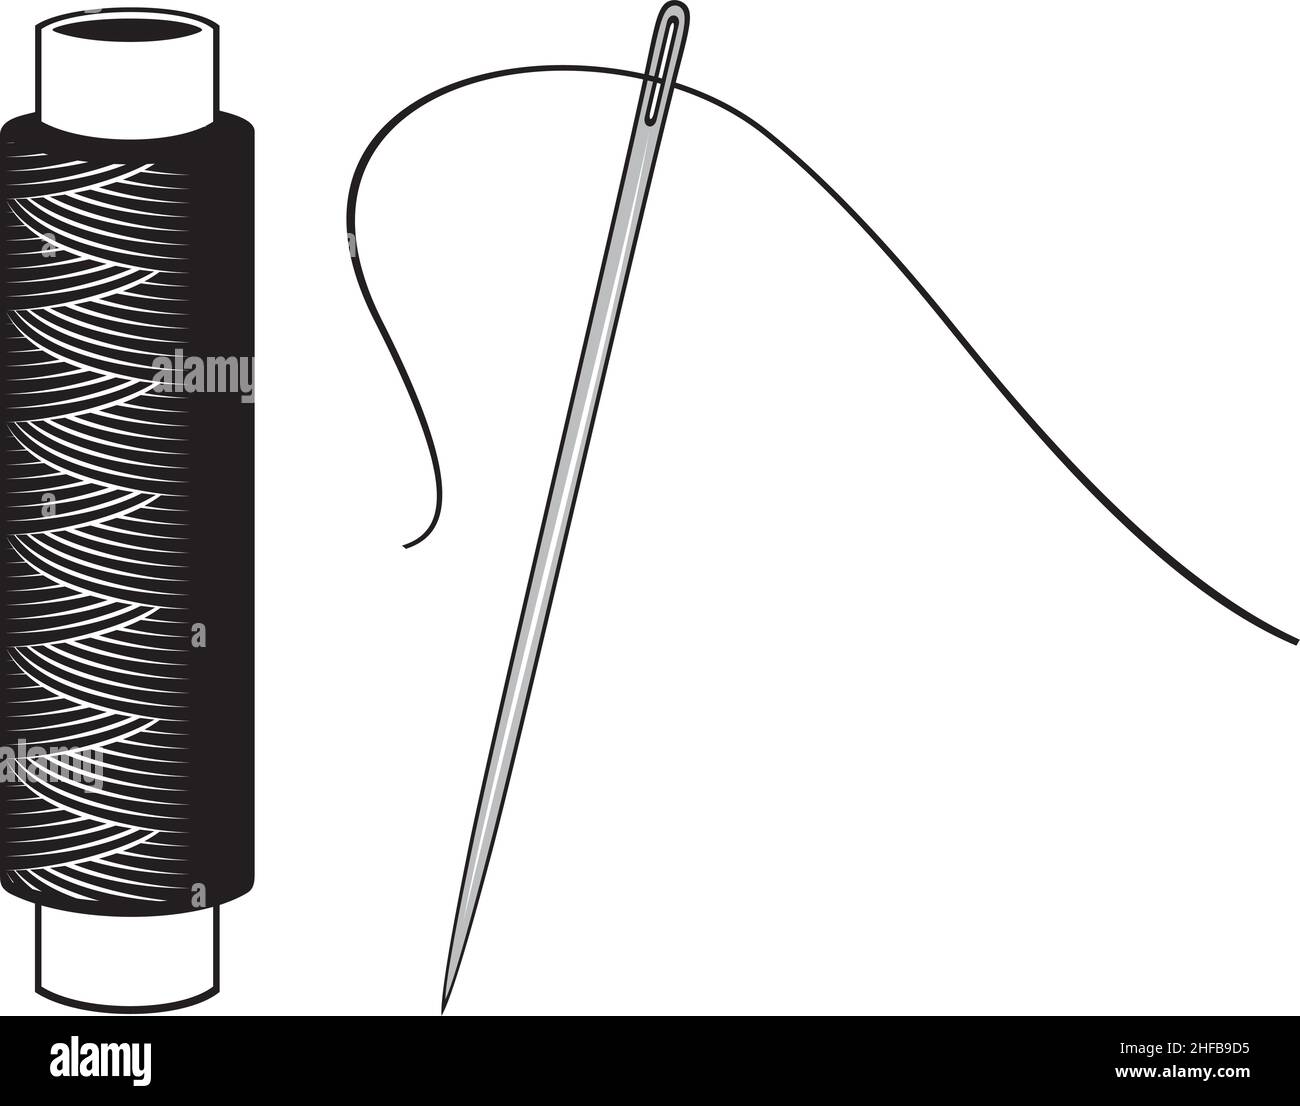 Cotton reel and needle Black and White Stock Photos & Images - Alamy